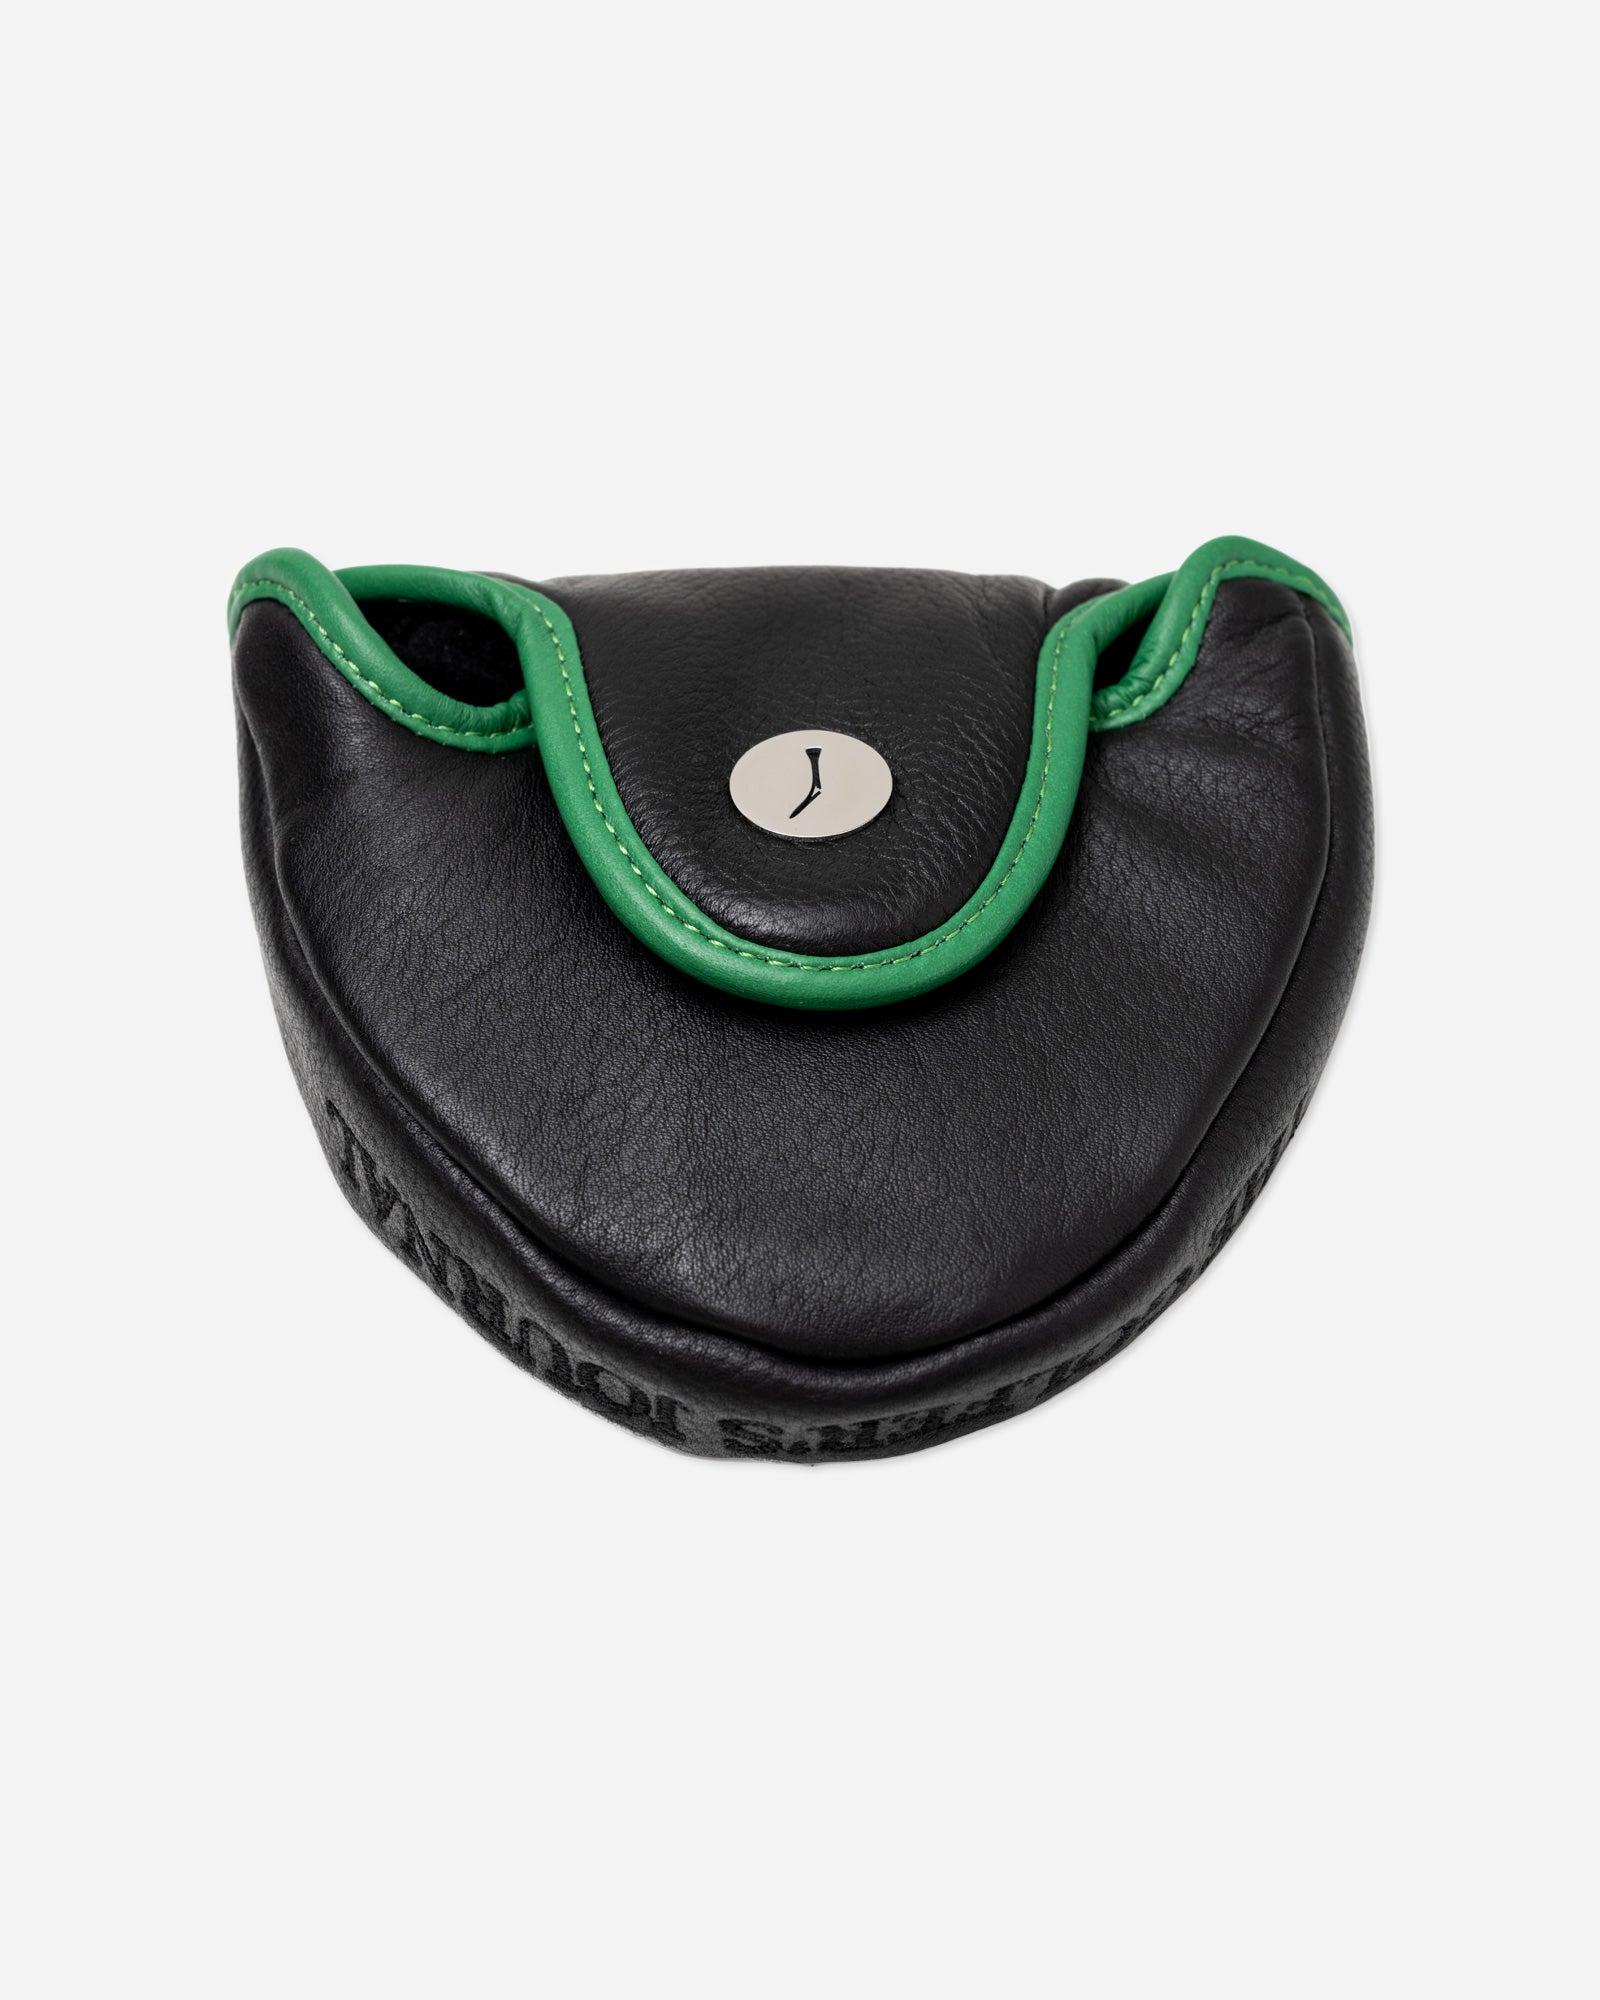 THE GOLFERS JOURNAL The Mallet Putter Cover in Green